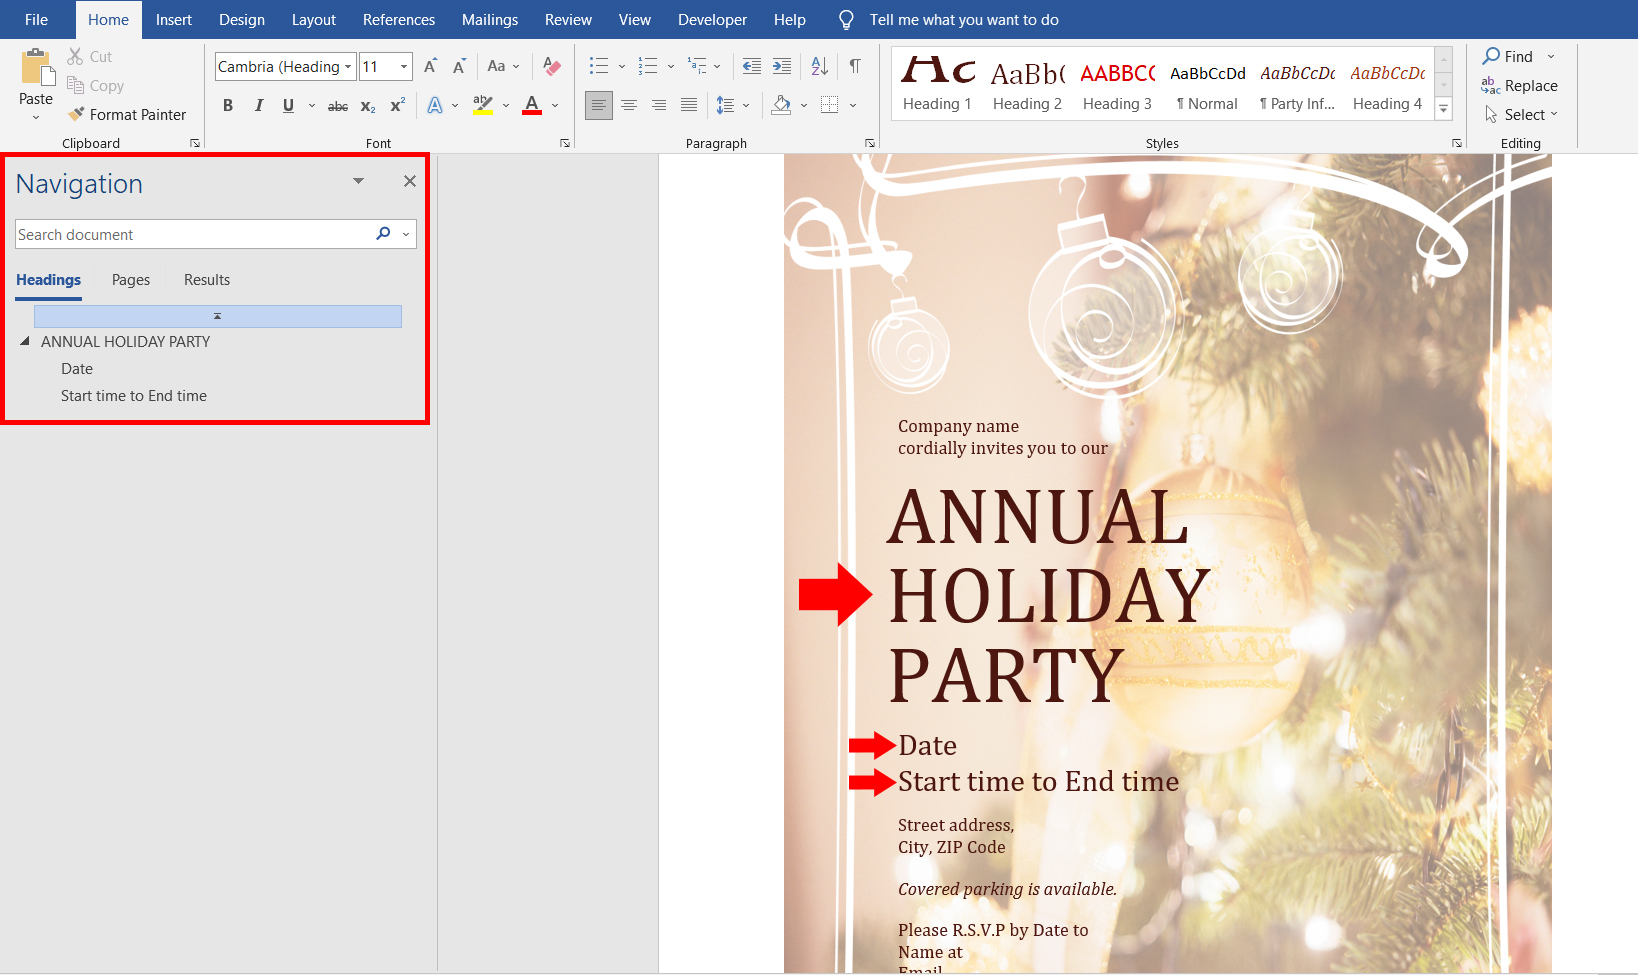 how-to-make-an-invitation-on-microsoft-word